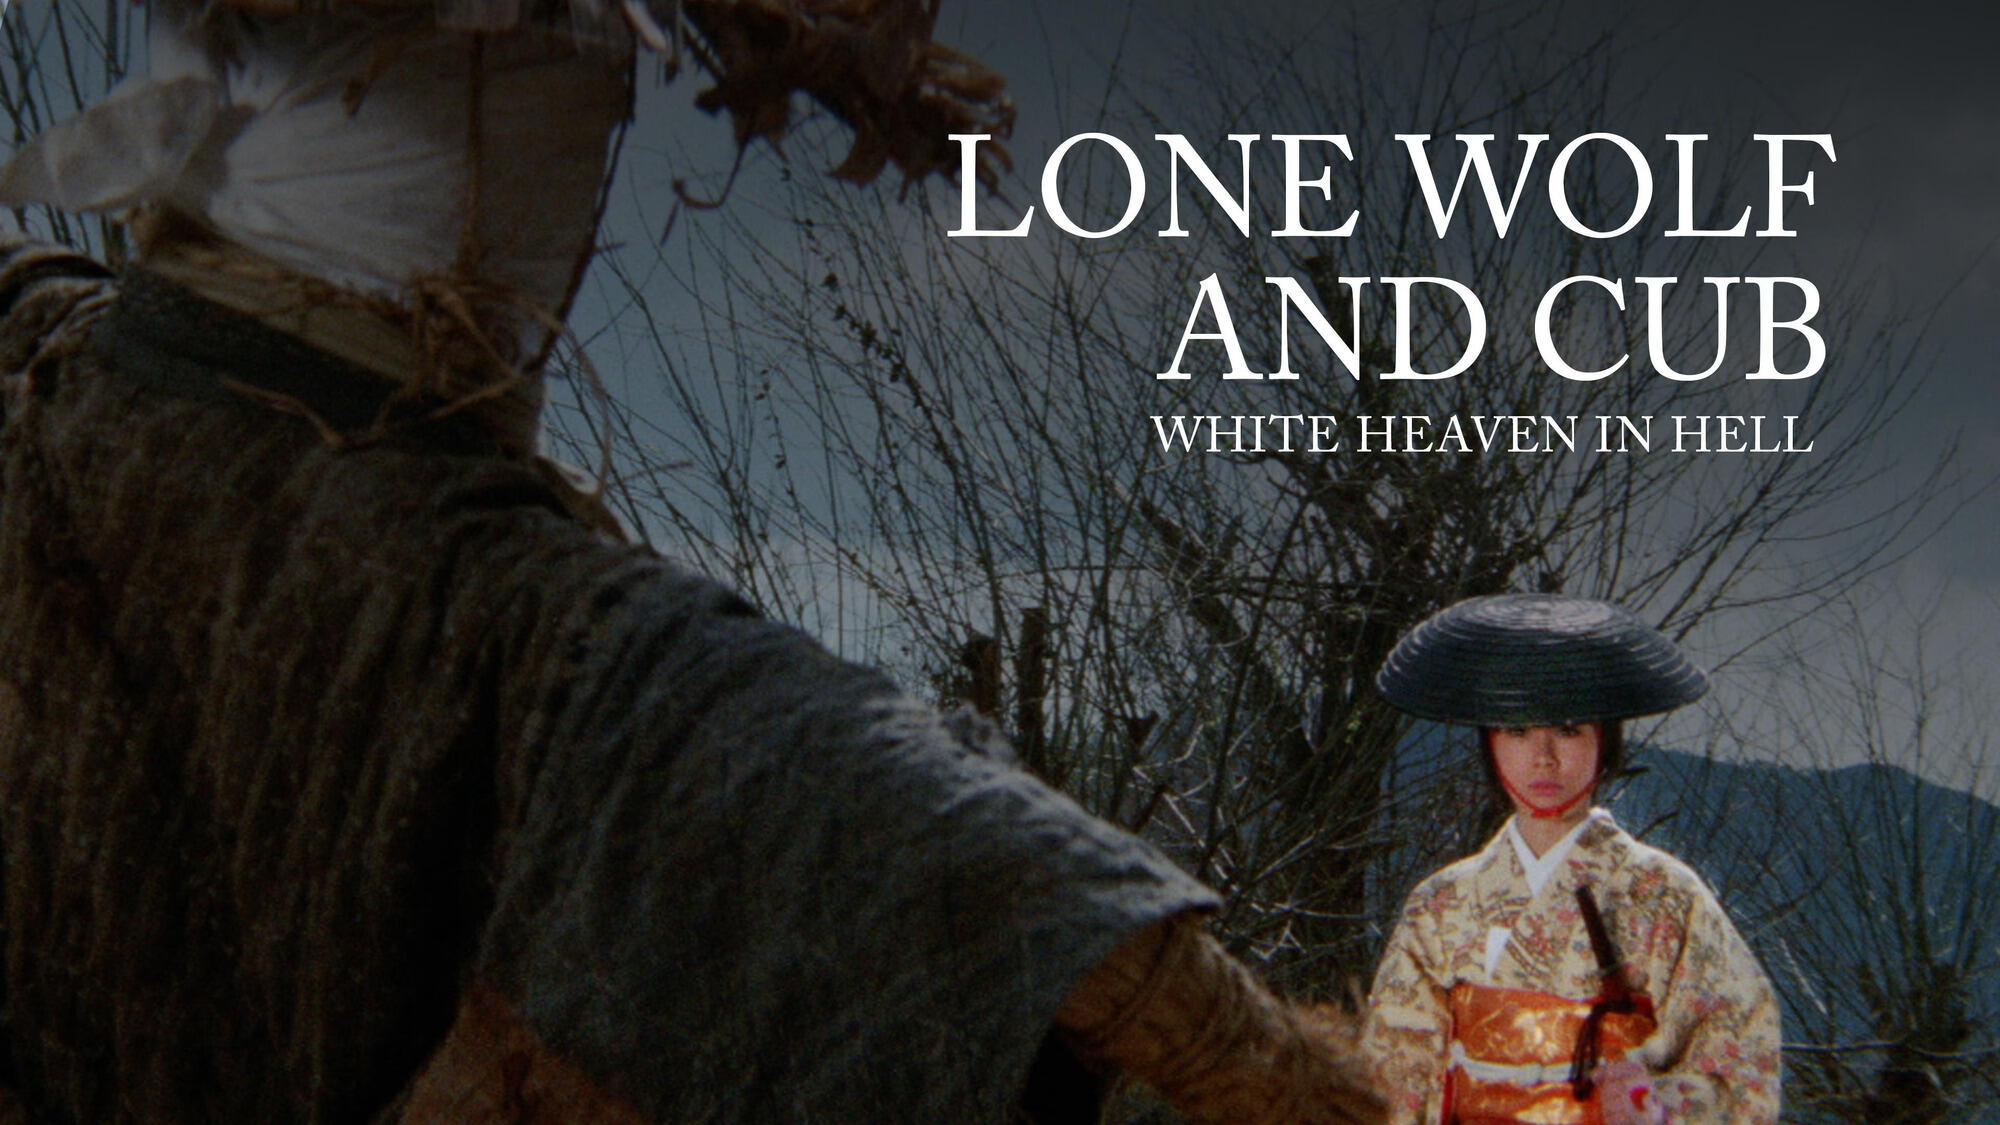 32-facts-about-the-movie-lone-wolf-and-cub-white-heaven-in-hell